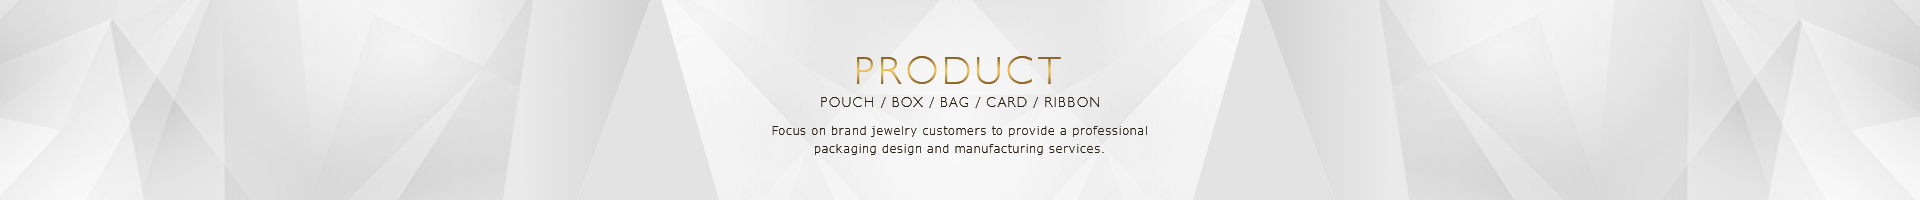 Wholesale high end jewelry box, jewelry gift boxes factory - Jewelry boxes